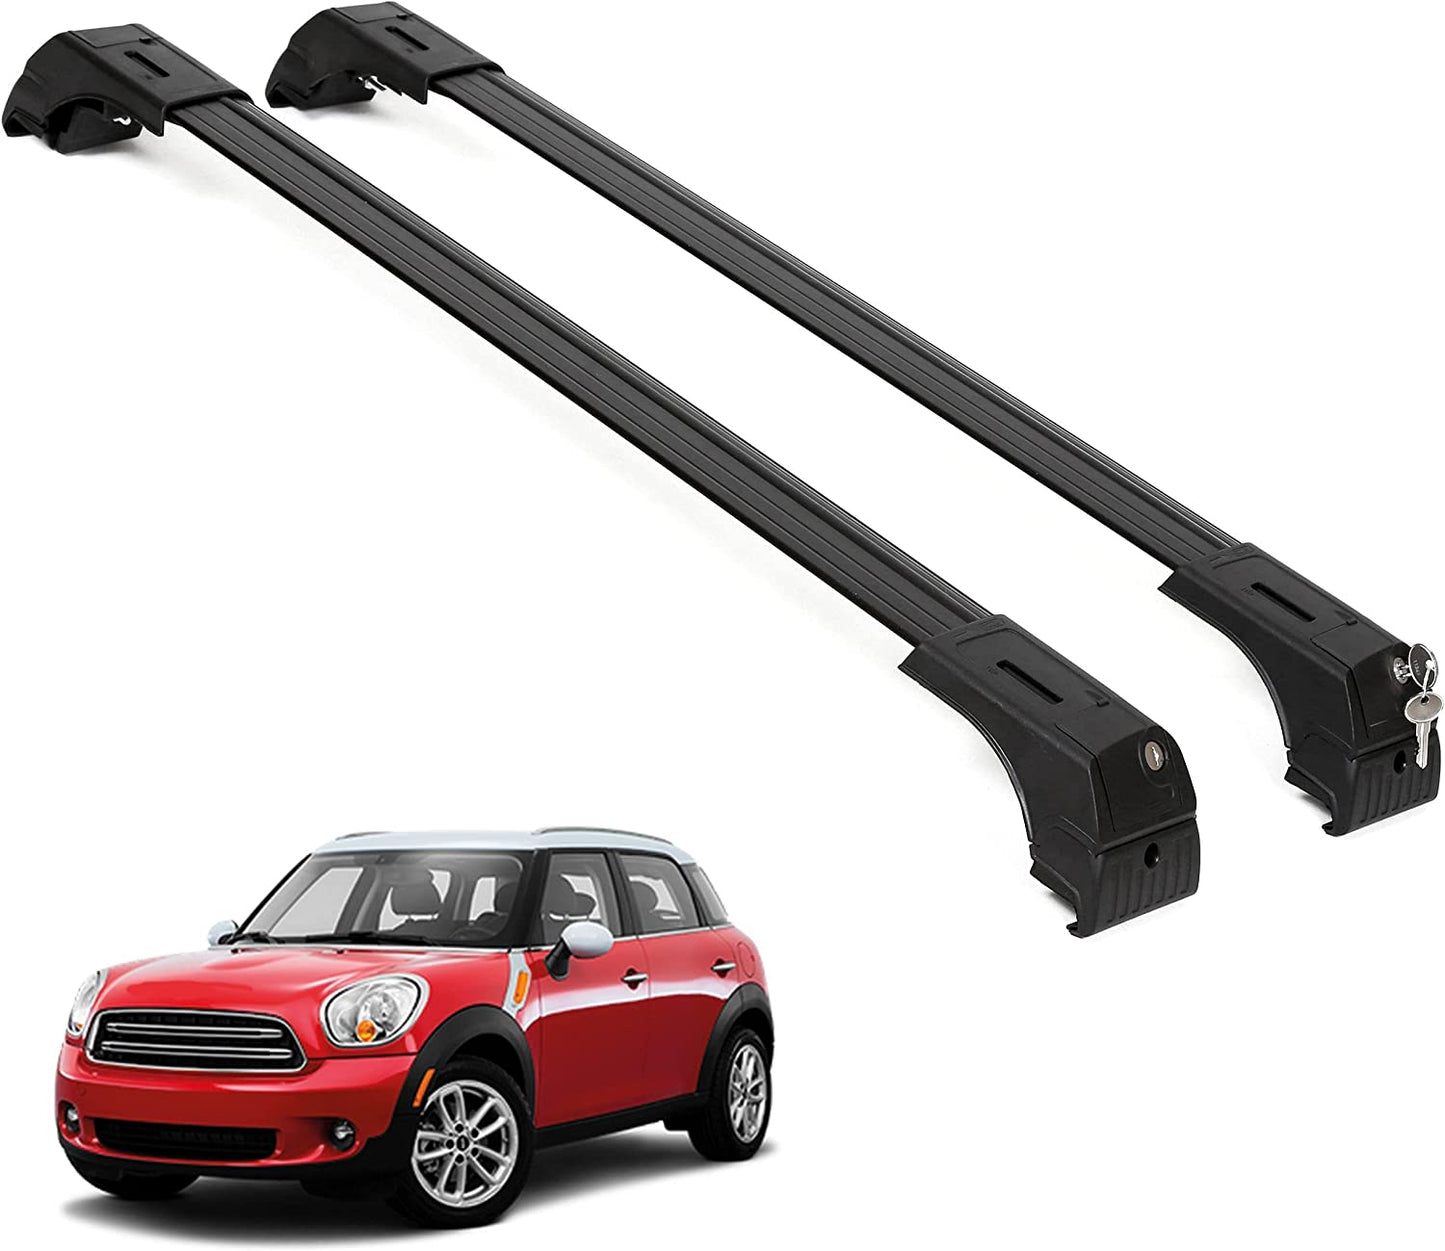 Roof Rack Cross Bars Compatible w/ Mini Cooper Countrymen (R60) 2011-2016 - Aluminum Lockable Cargo Carrier for Rooftop Luggage, Skis, Bikes, & Kayaks - Car Accessories - (Black, Set of 2)